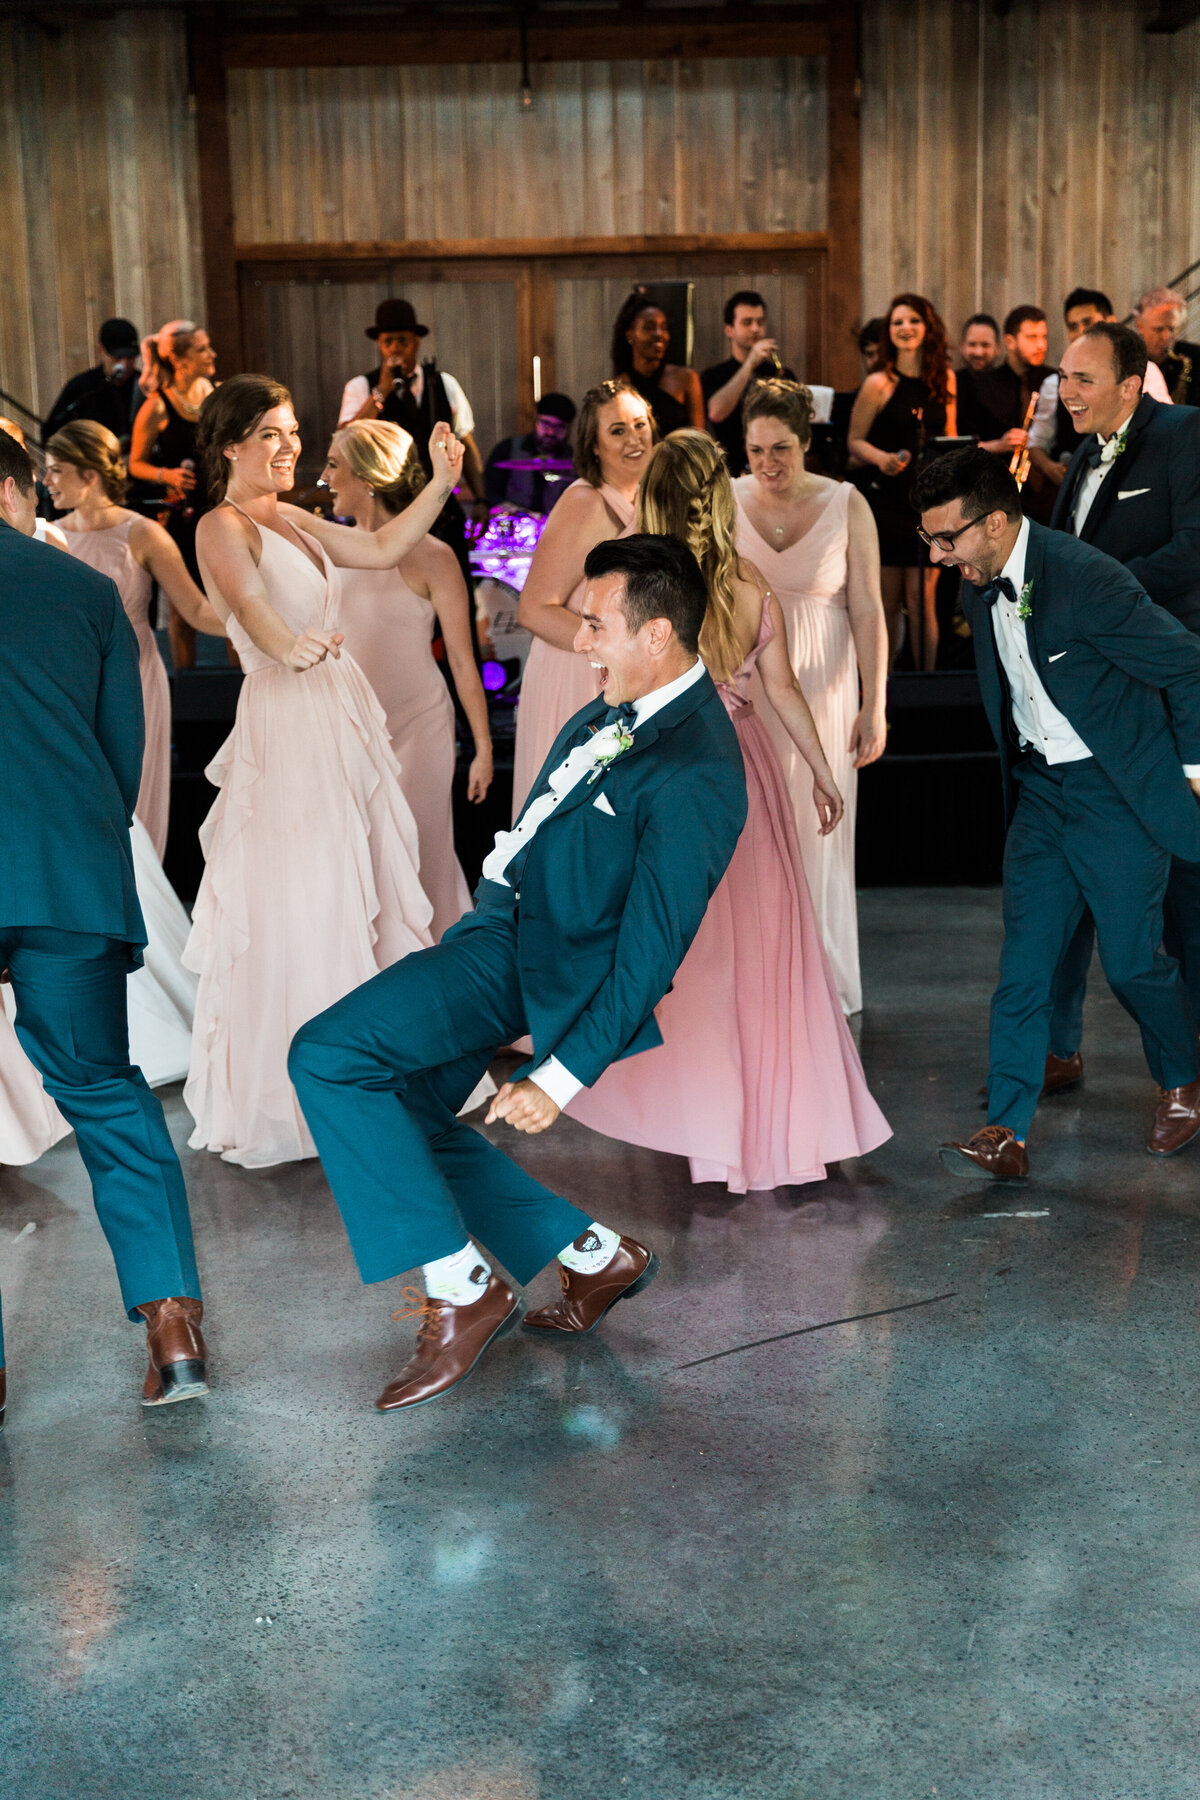 Guests dancing during wedding reception